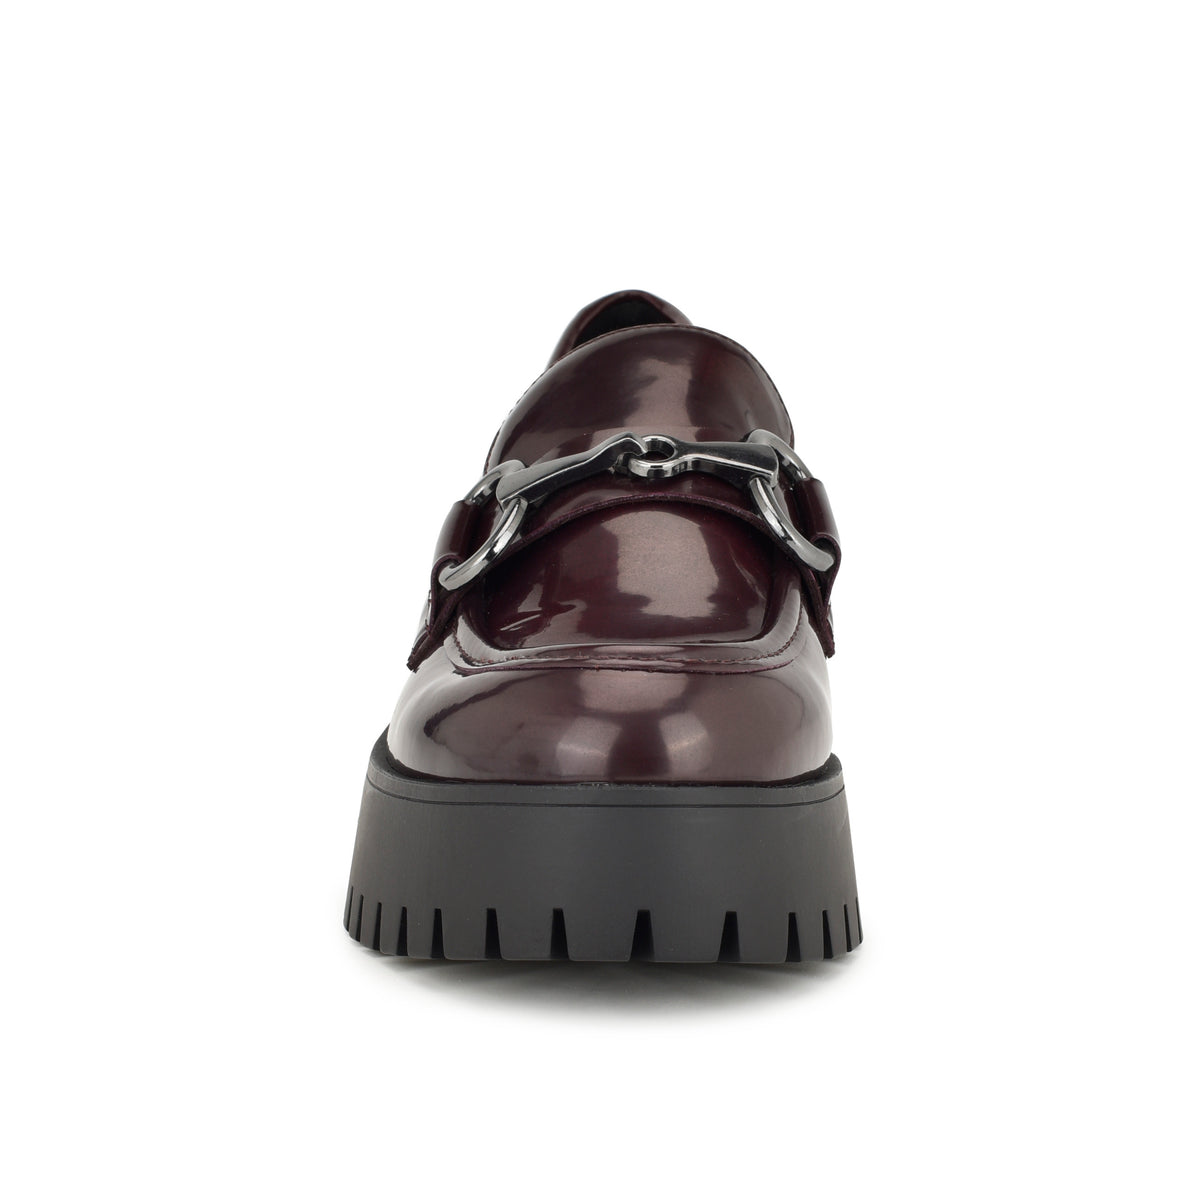 Kpacie Casual Moc Loafers